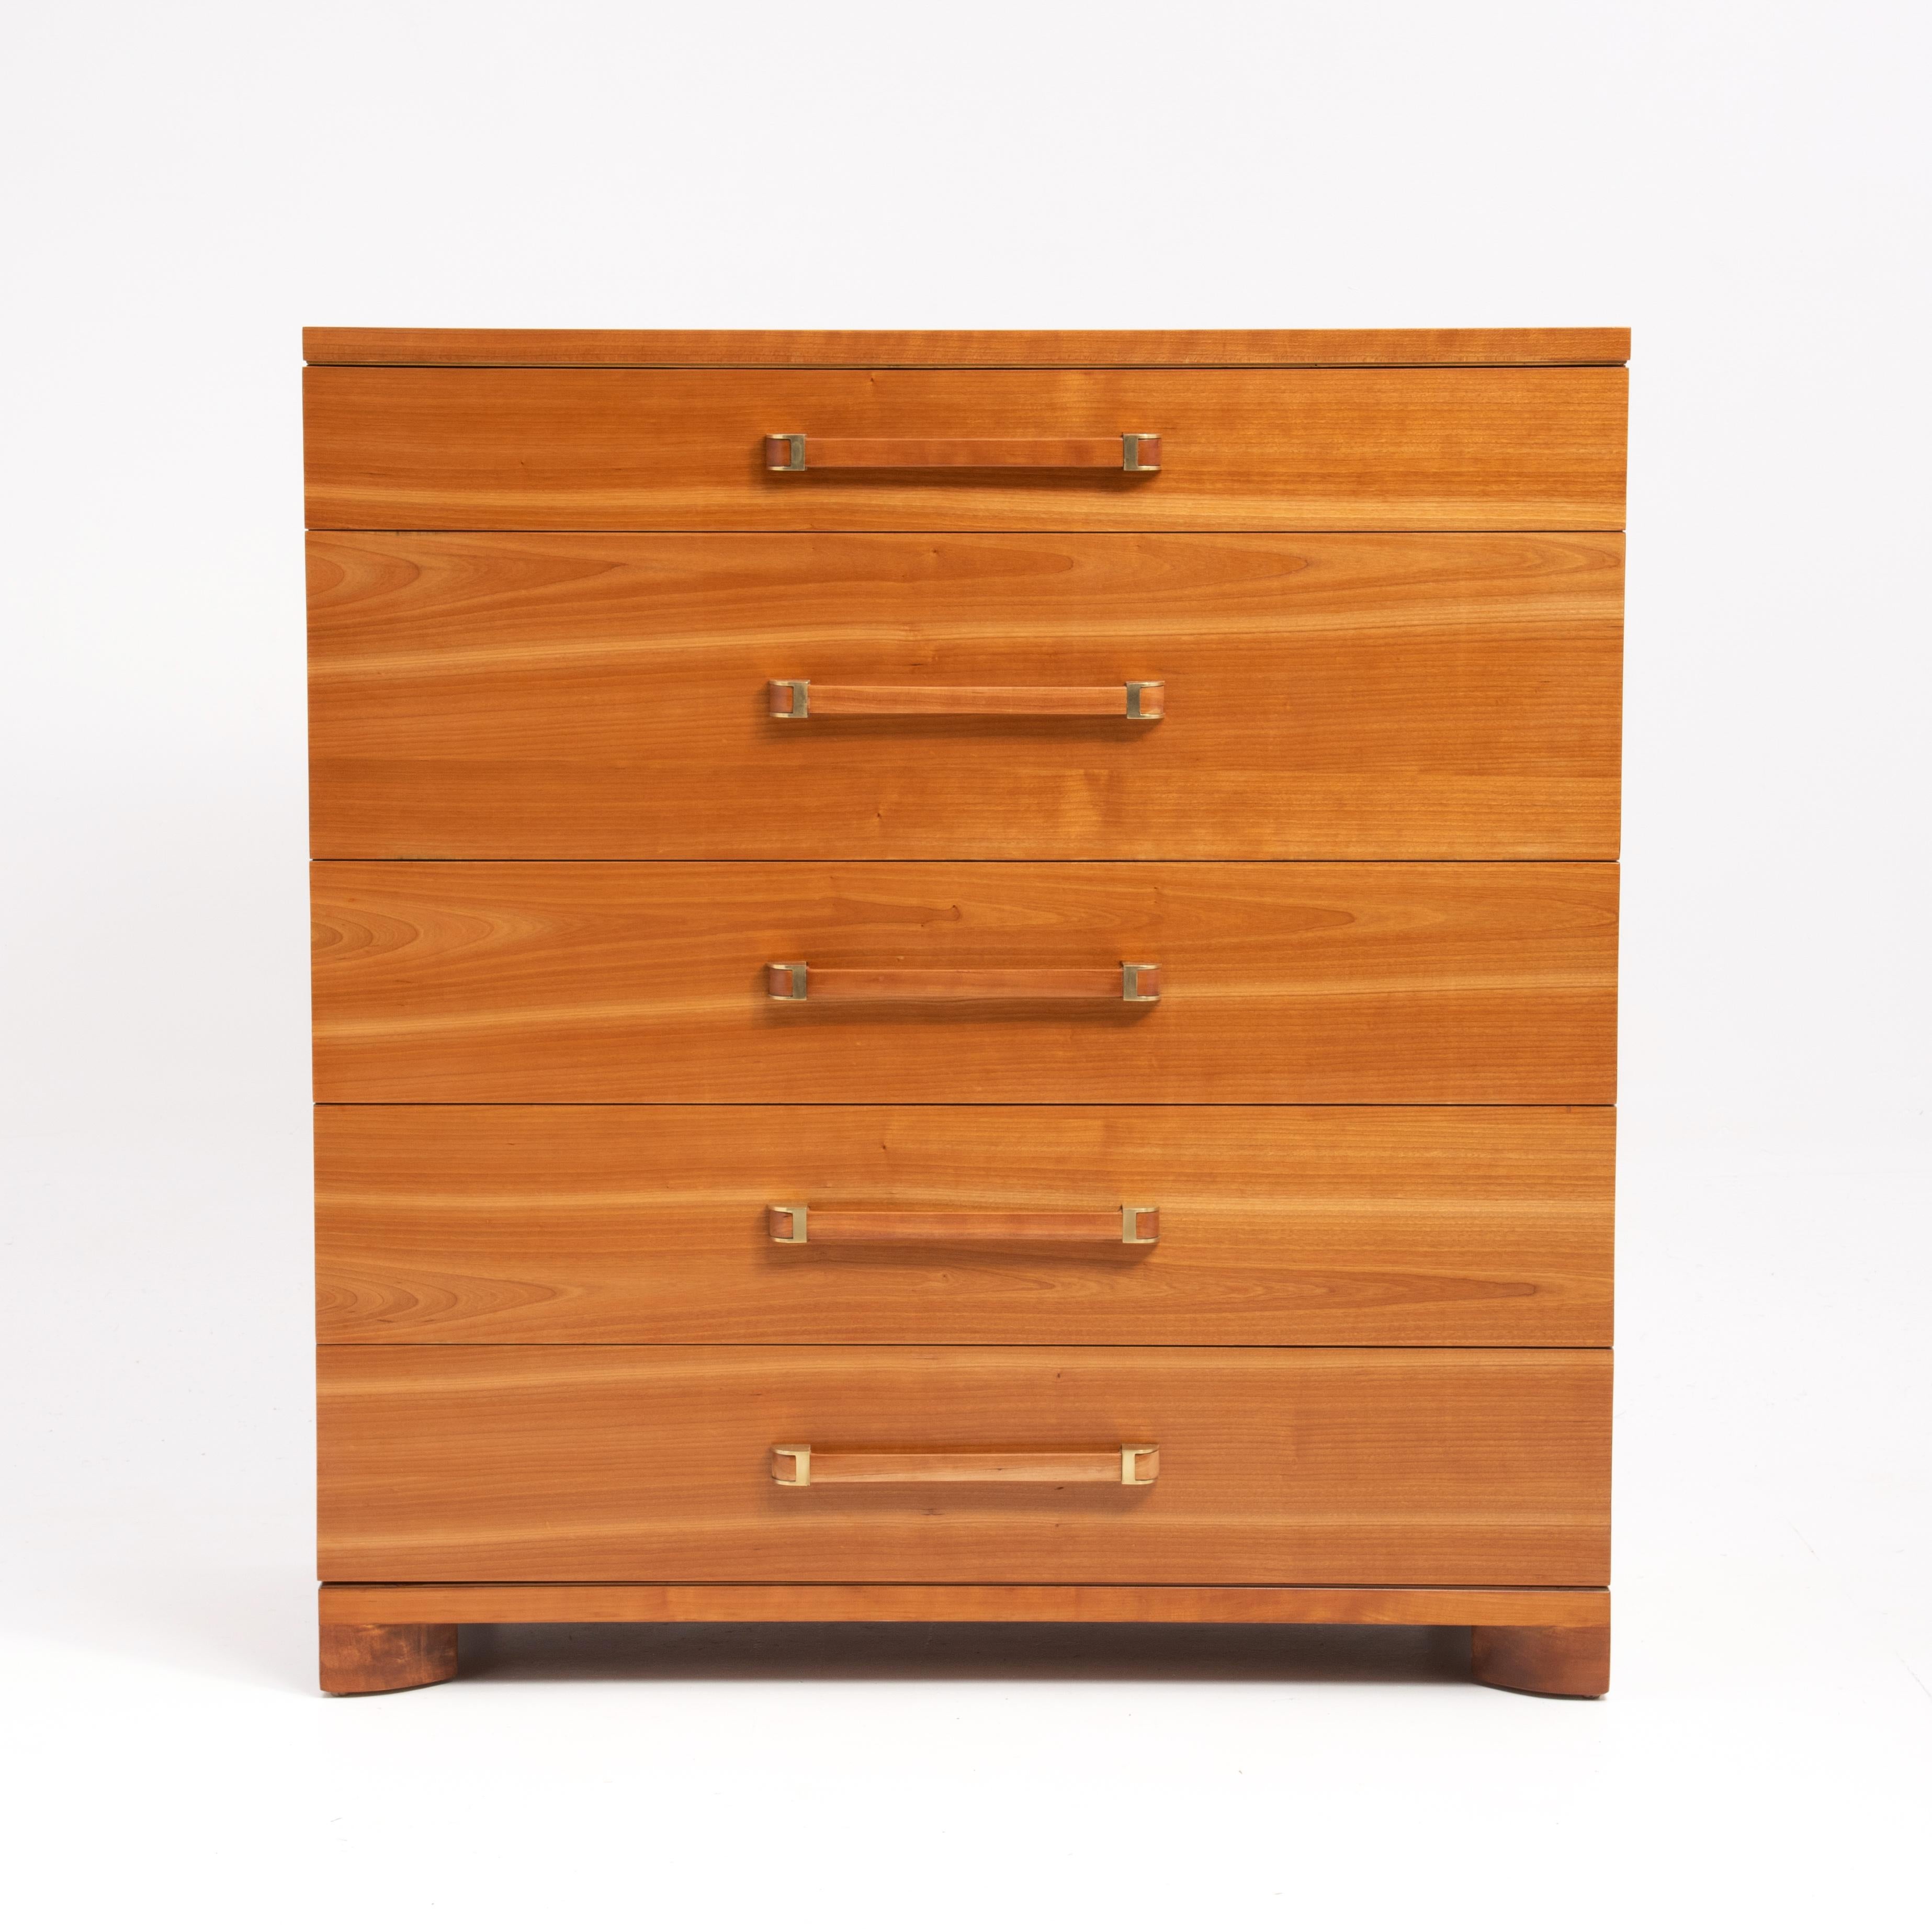 An impressive and well designed five drawer chest or dresser by the John Widdicomb Furniture Company. This is the larger version of the more common 32